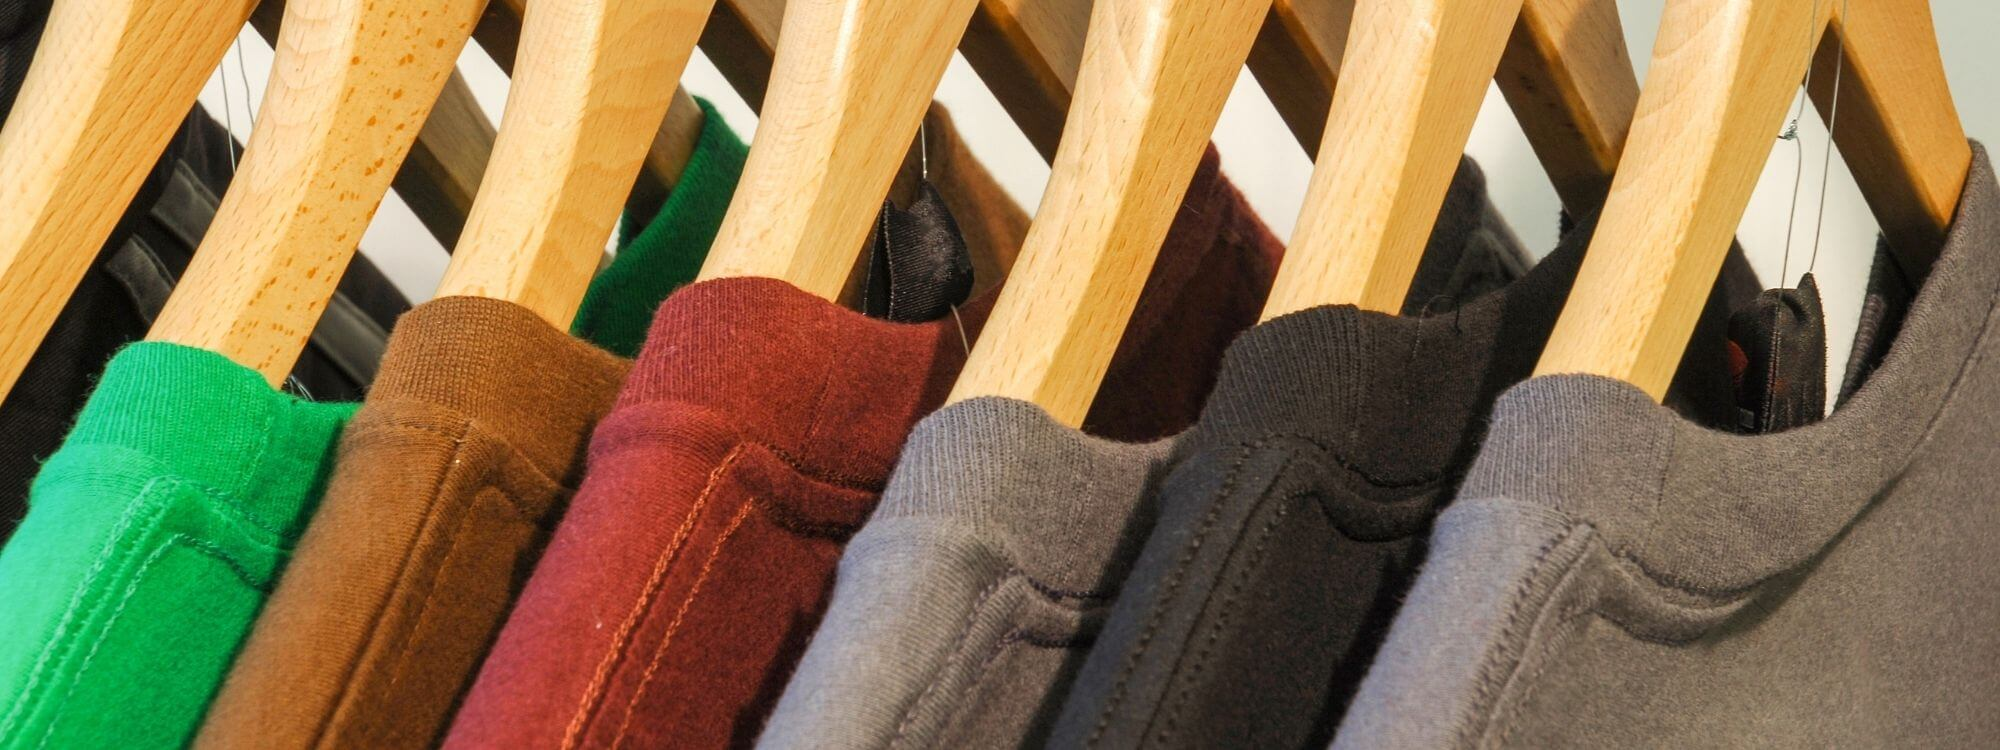 a row of colorful t-shirts on hangers